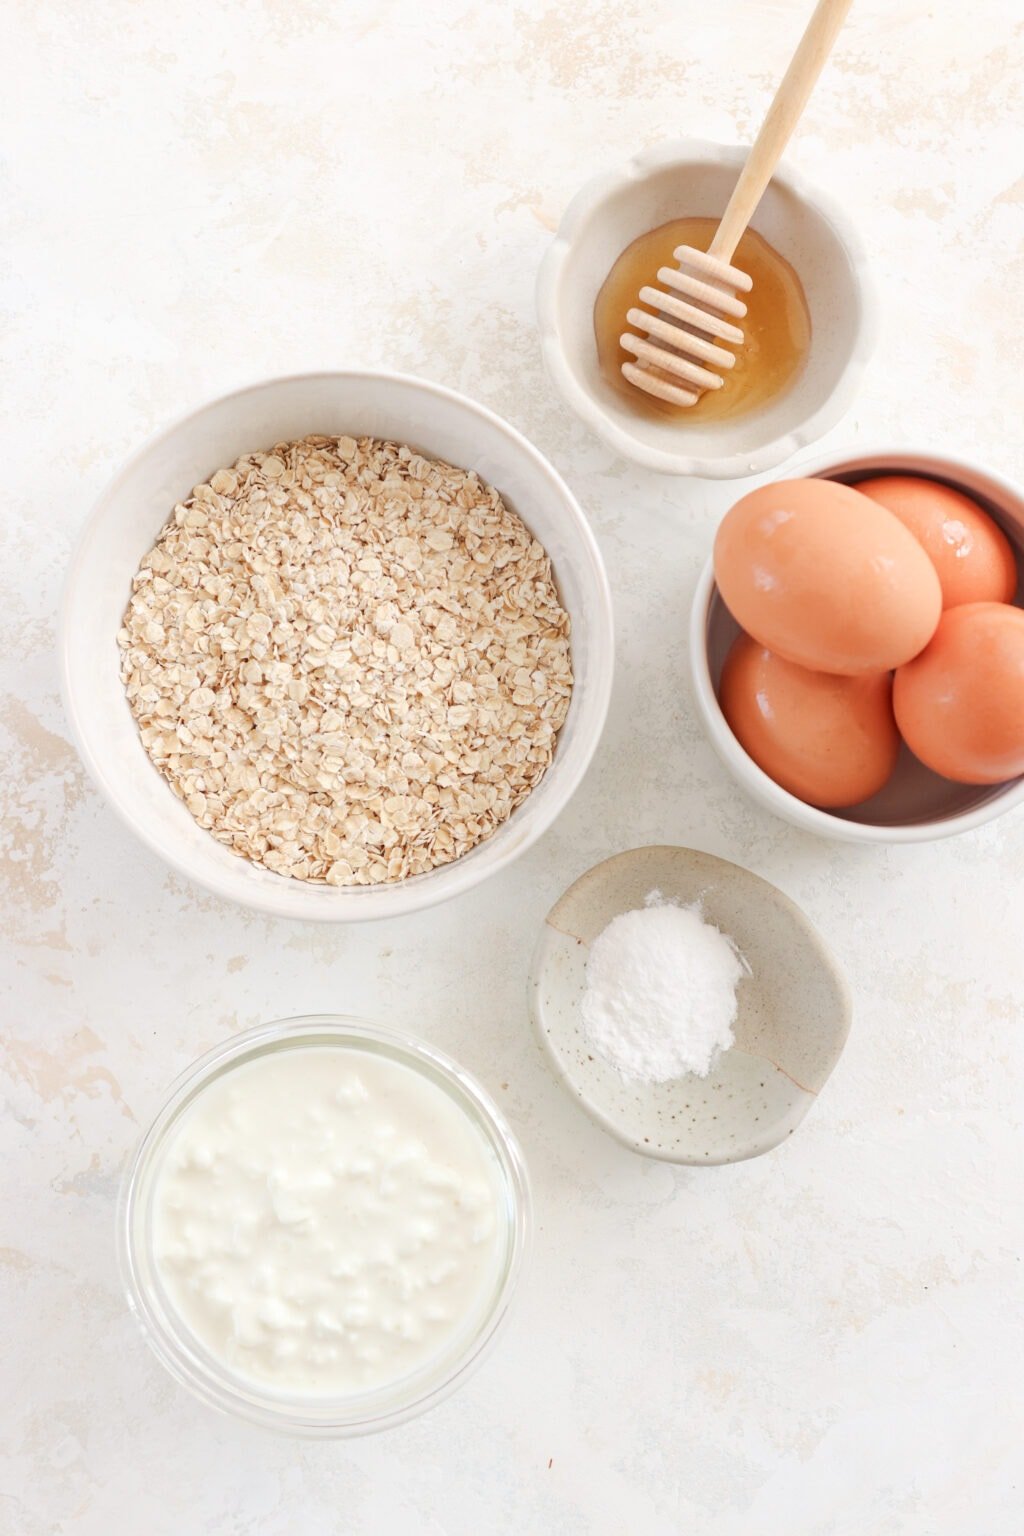 Ingredients for recipe in small bowls includes honey, quick oats, eggs, salt, and cottage cheese